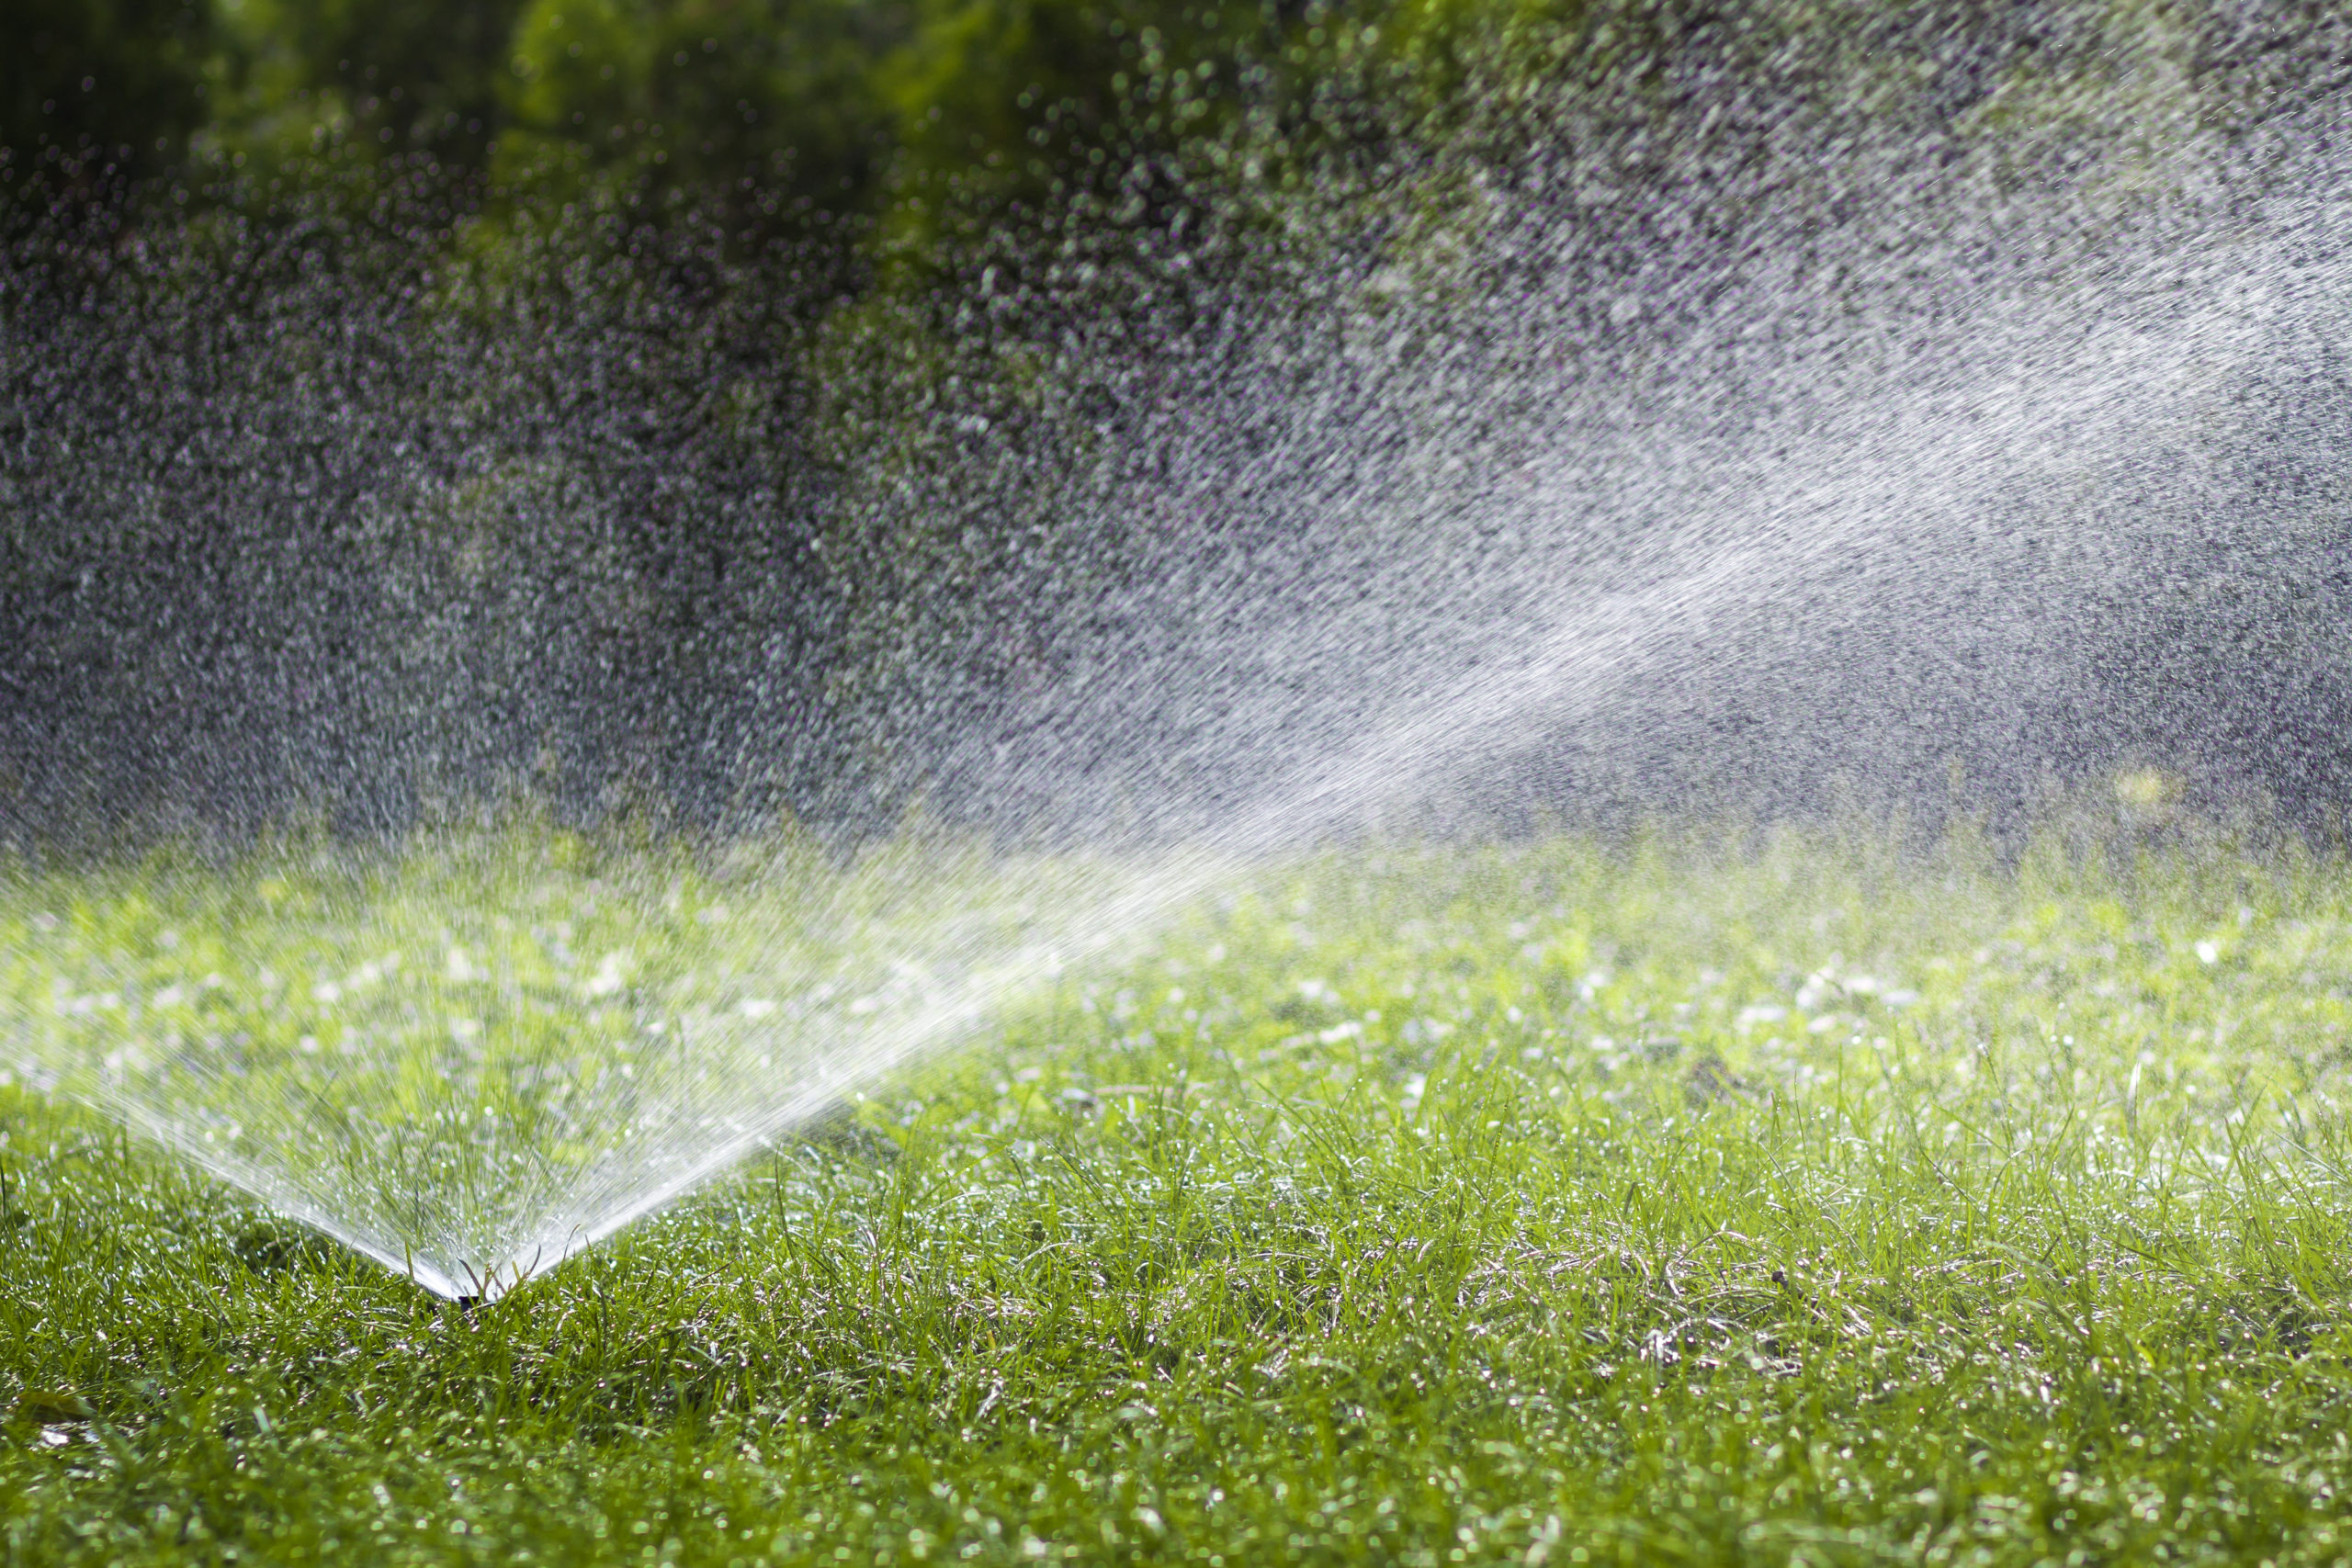 Lawn water sprinkler spraying water over grass in garden on a hot summer day. Automatic watering lawns. Gardening and environment concept.